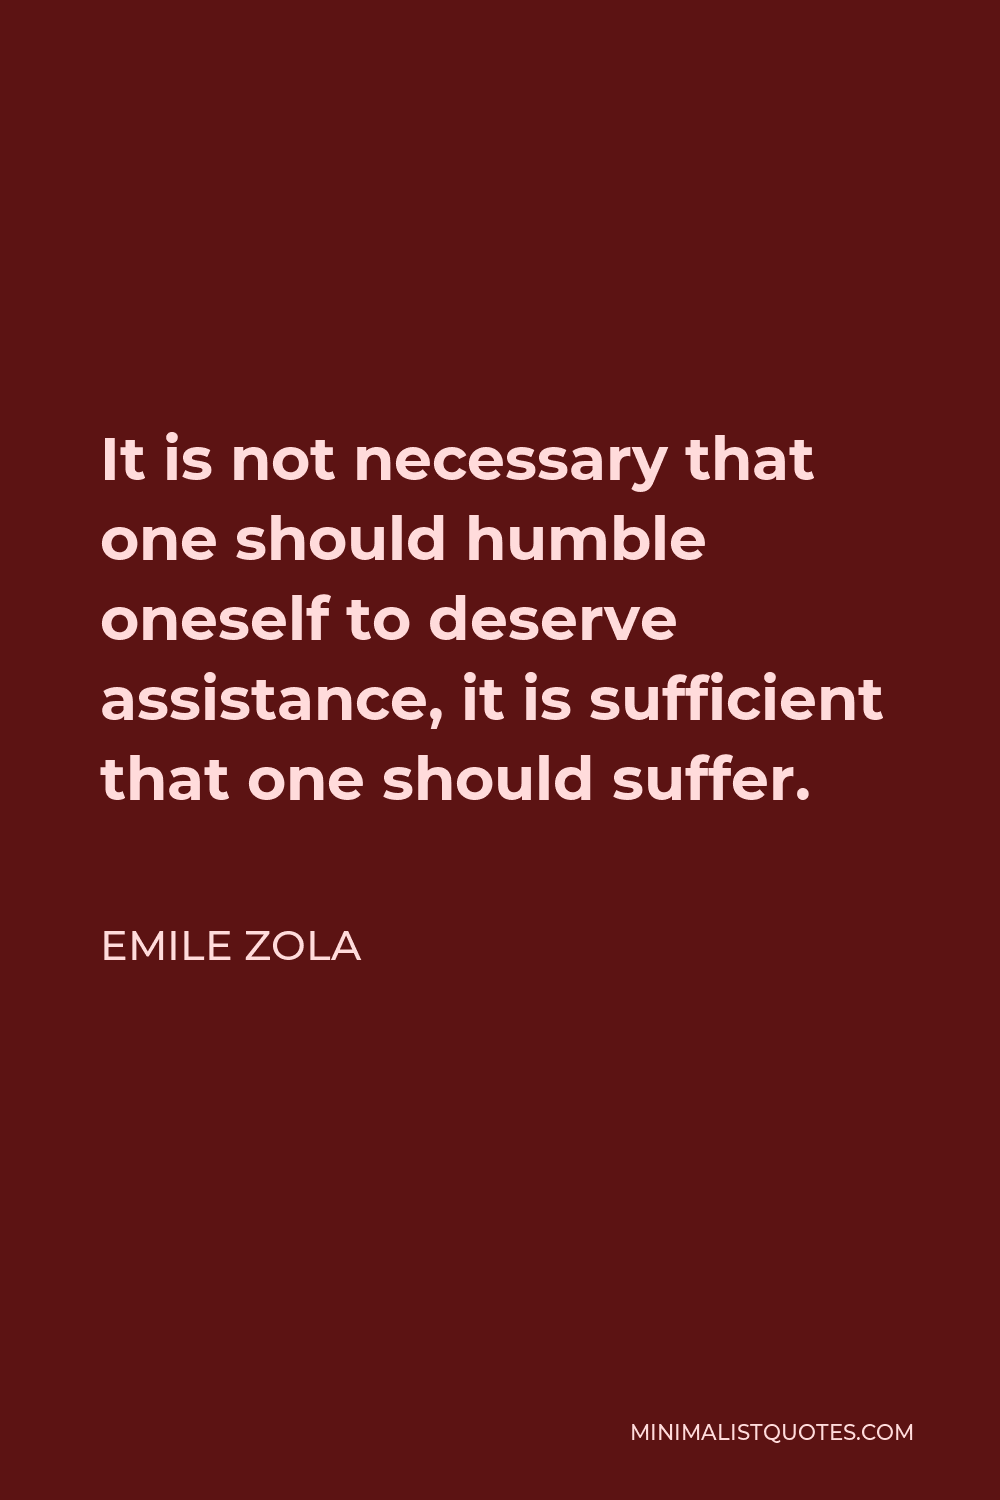 Emile Zola Quote - It is not necessary that one should humble oneself to deserve assistance, it is sufficient that one should suffer.